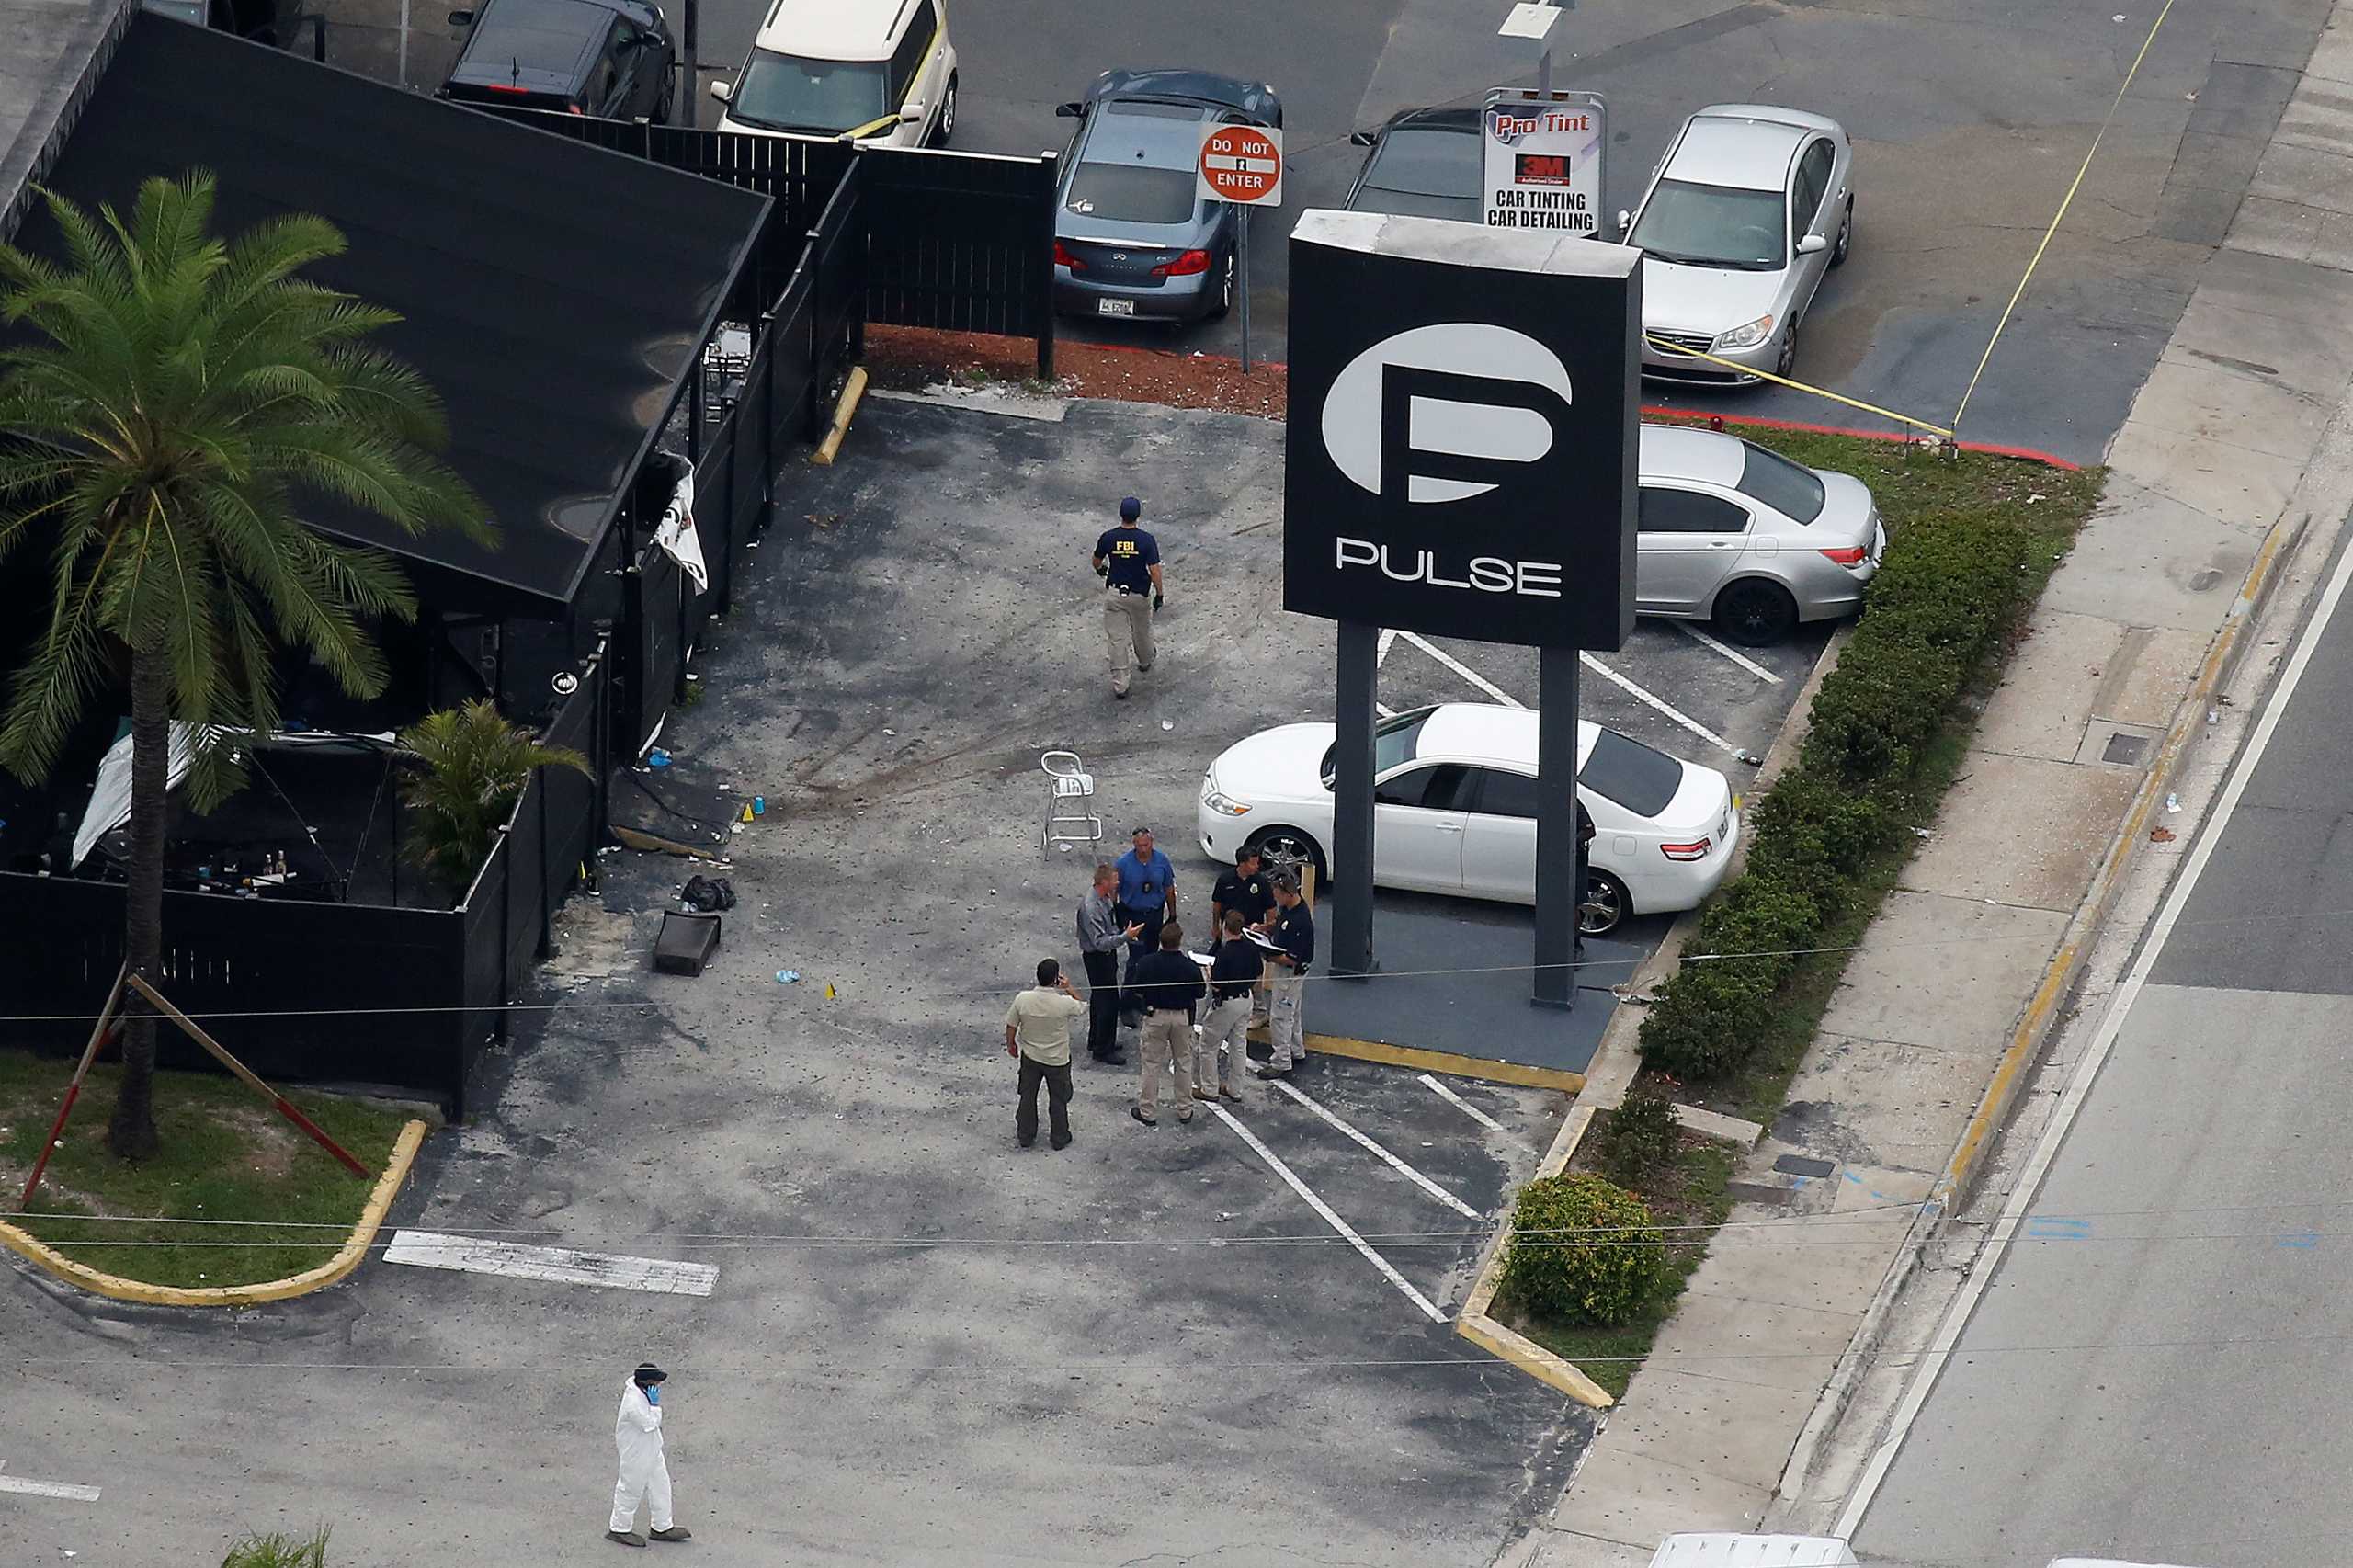 Investigators work the scene following a mass shooting at the Pulse gay nightclub in Orlando, Fla., on June 12, 2016. (Carlo Allegri—Reuters)